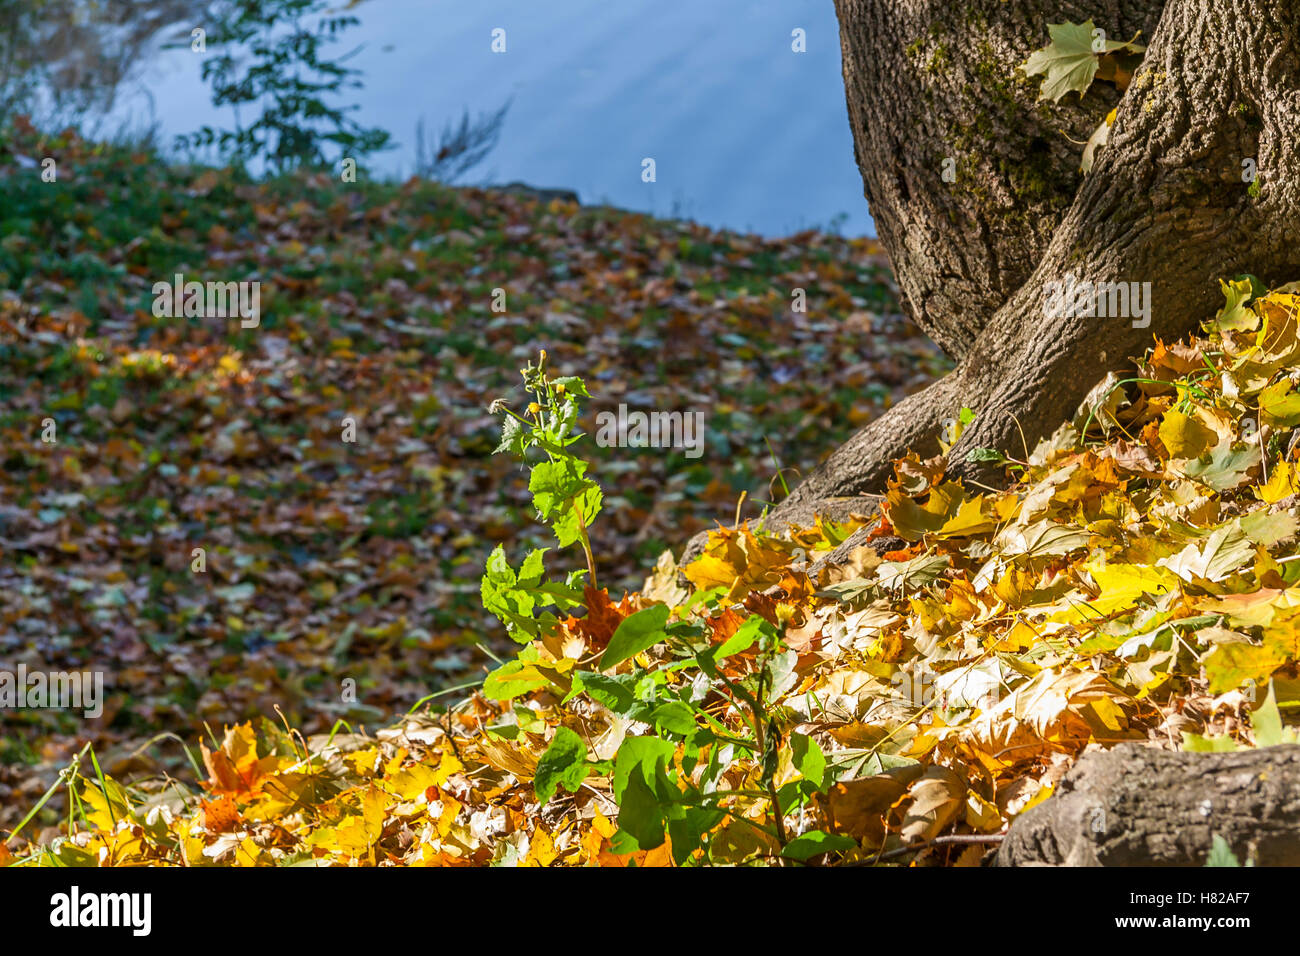 Autumn Foliage Yellow Maple Leaves Falling From Tree Stock Photo